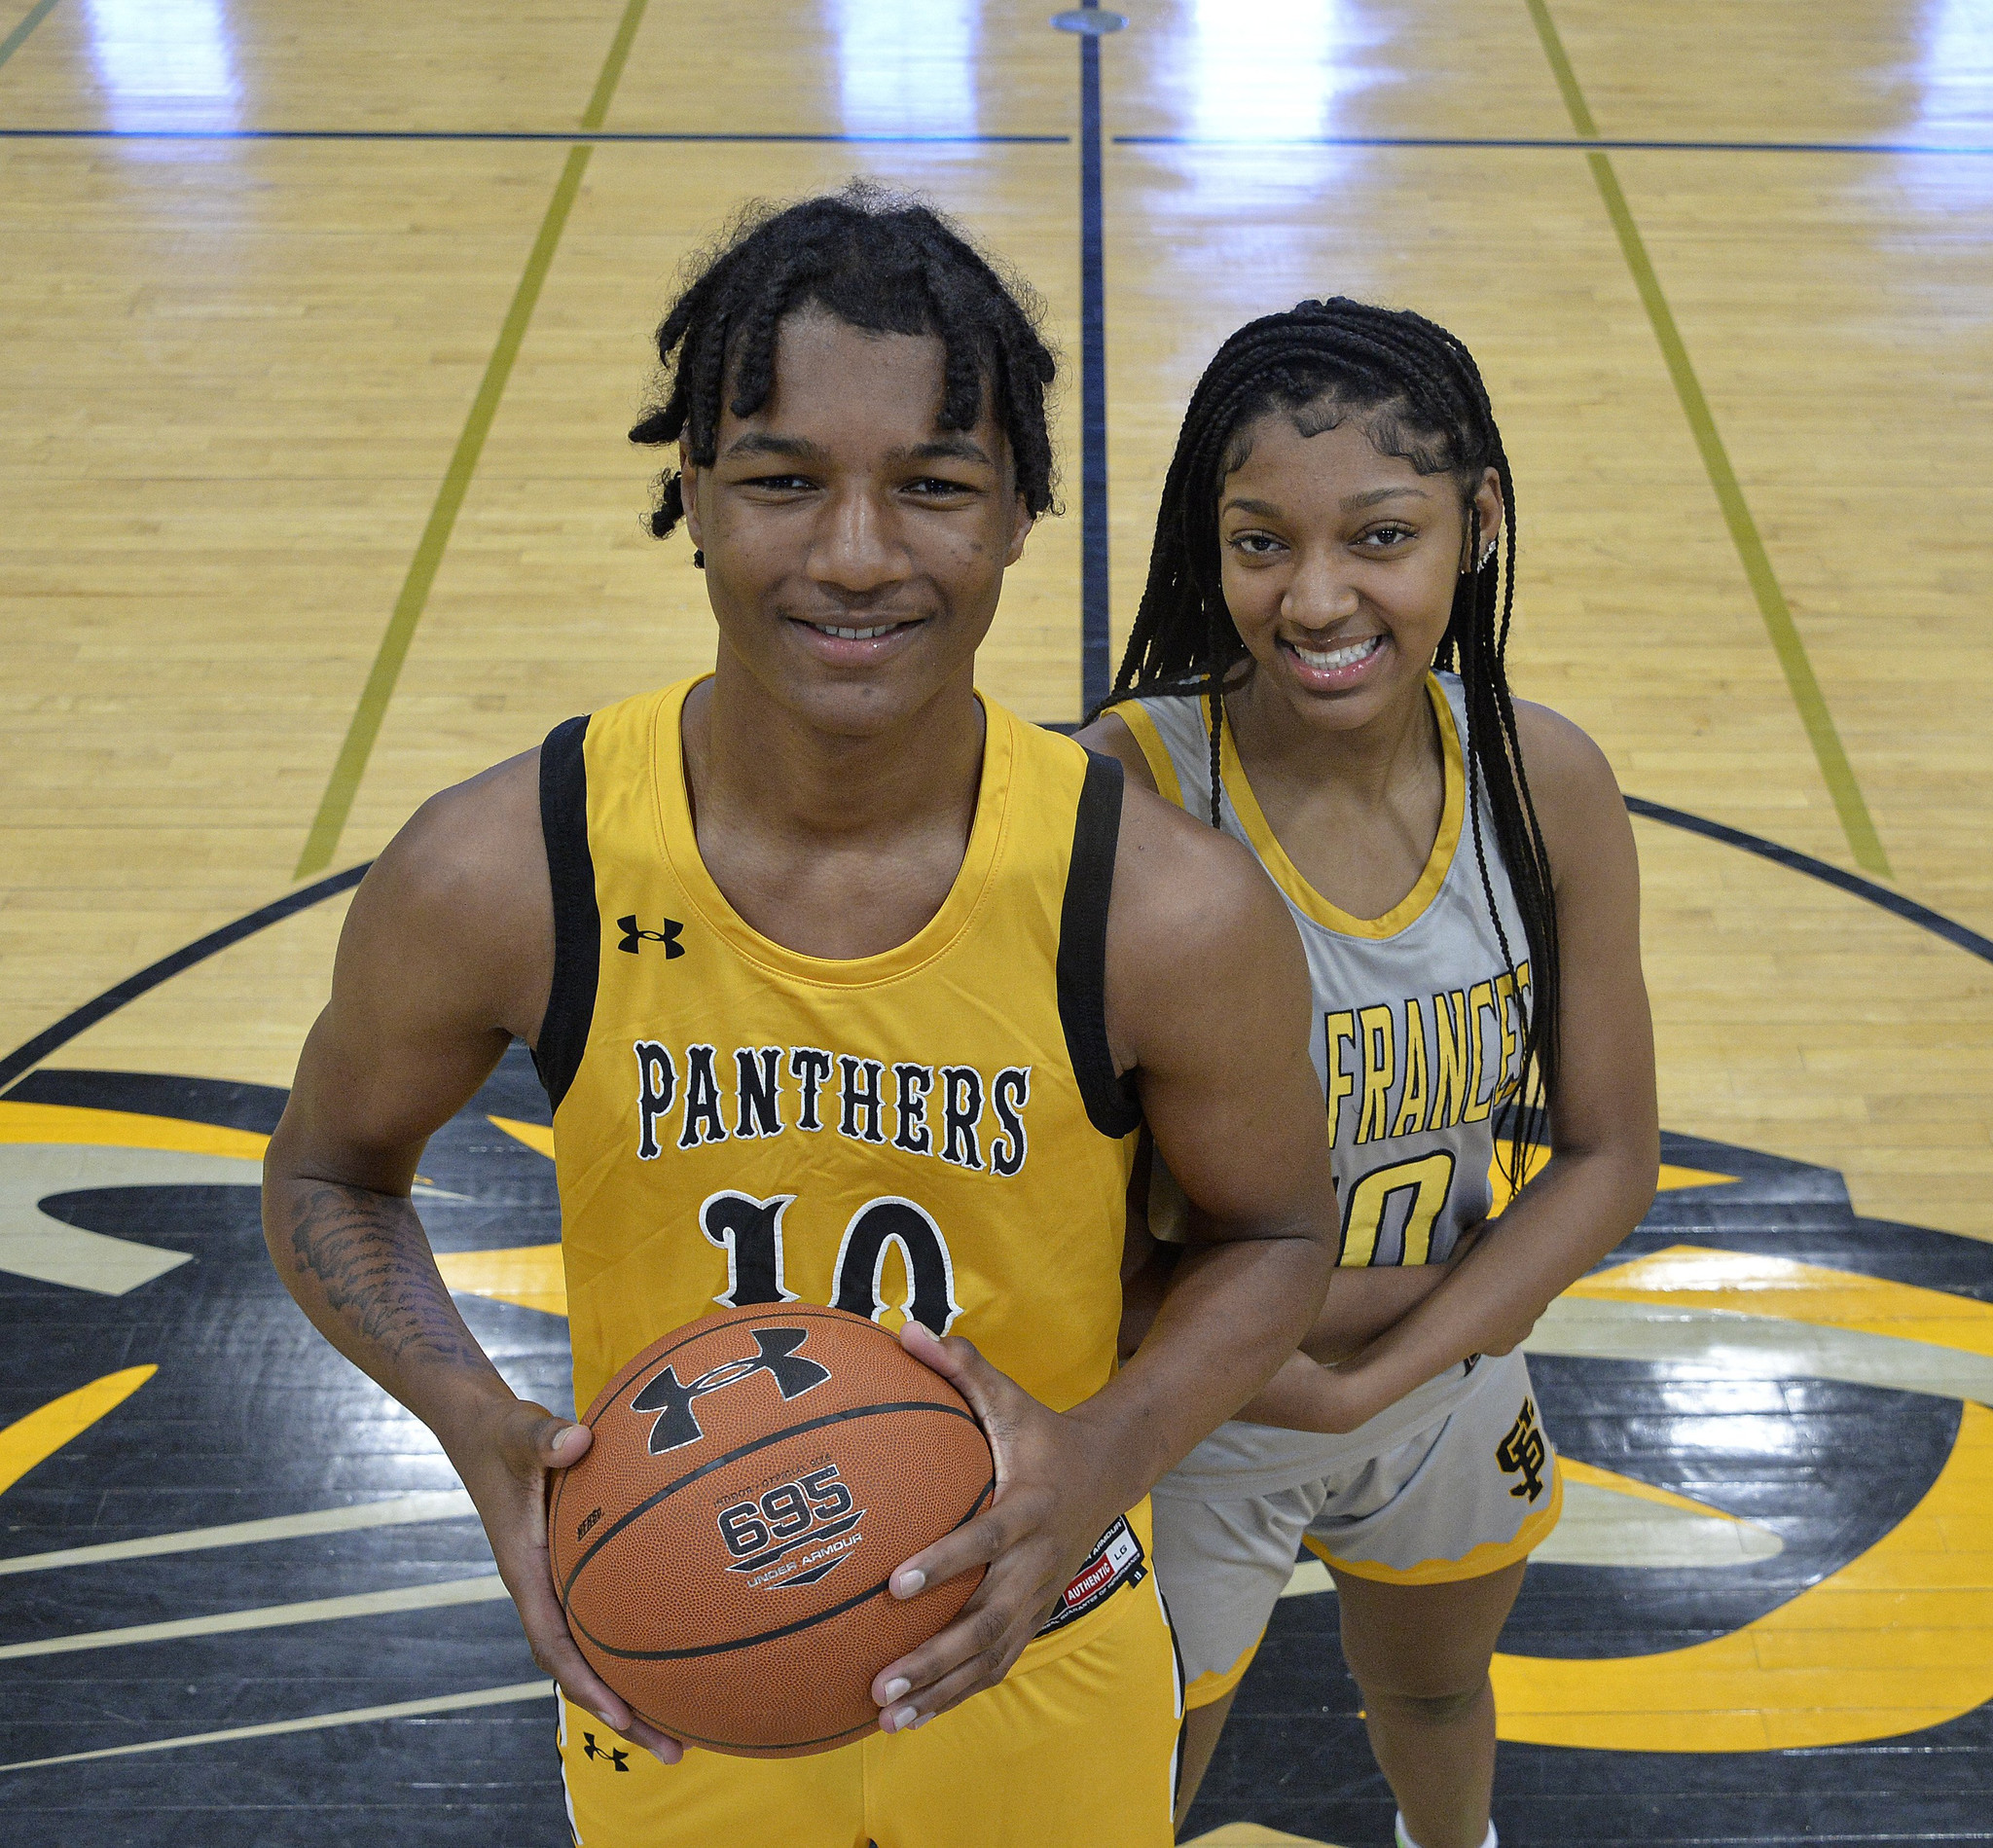 Maryland basketball commits Julian and Angel Reese